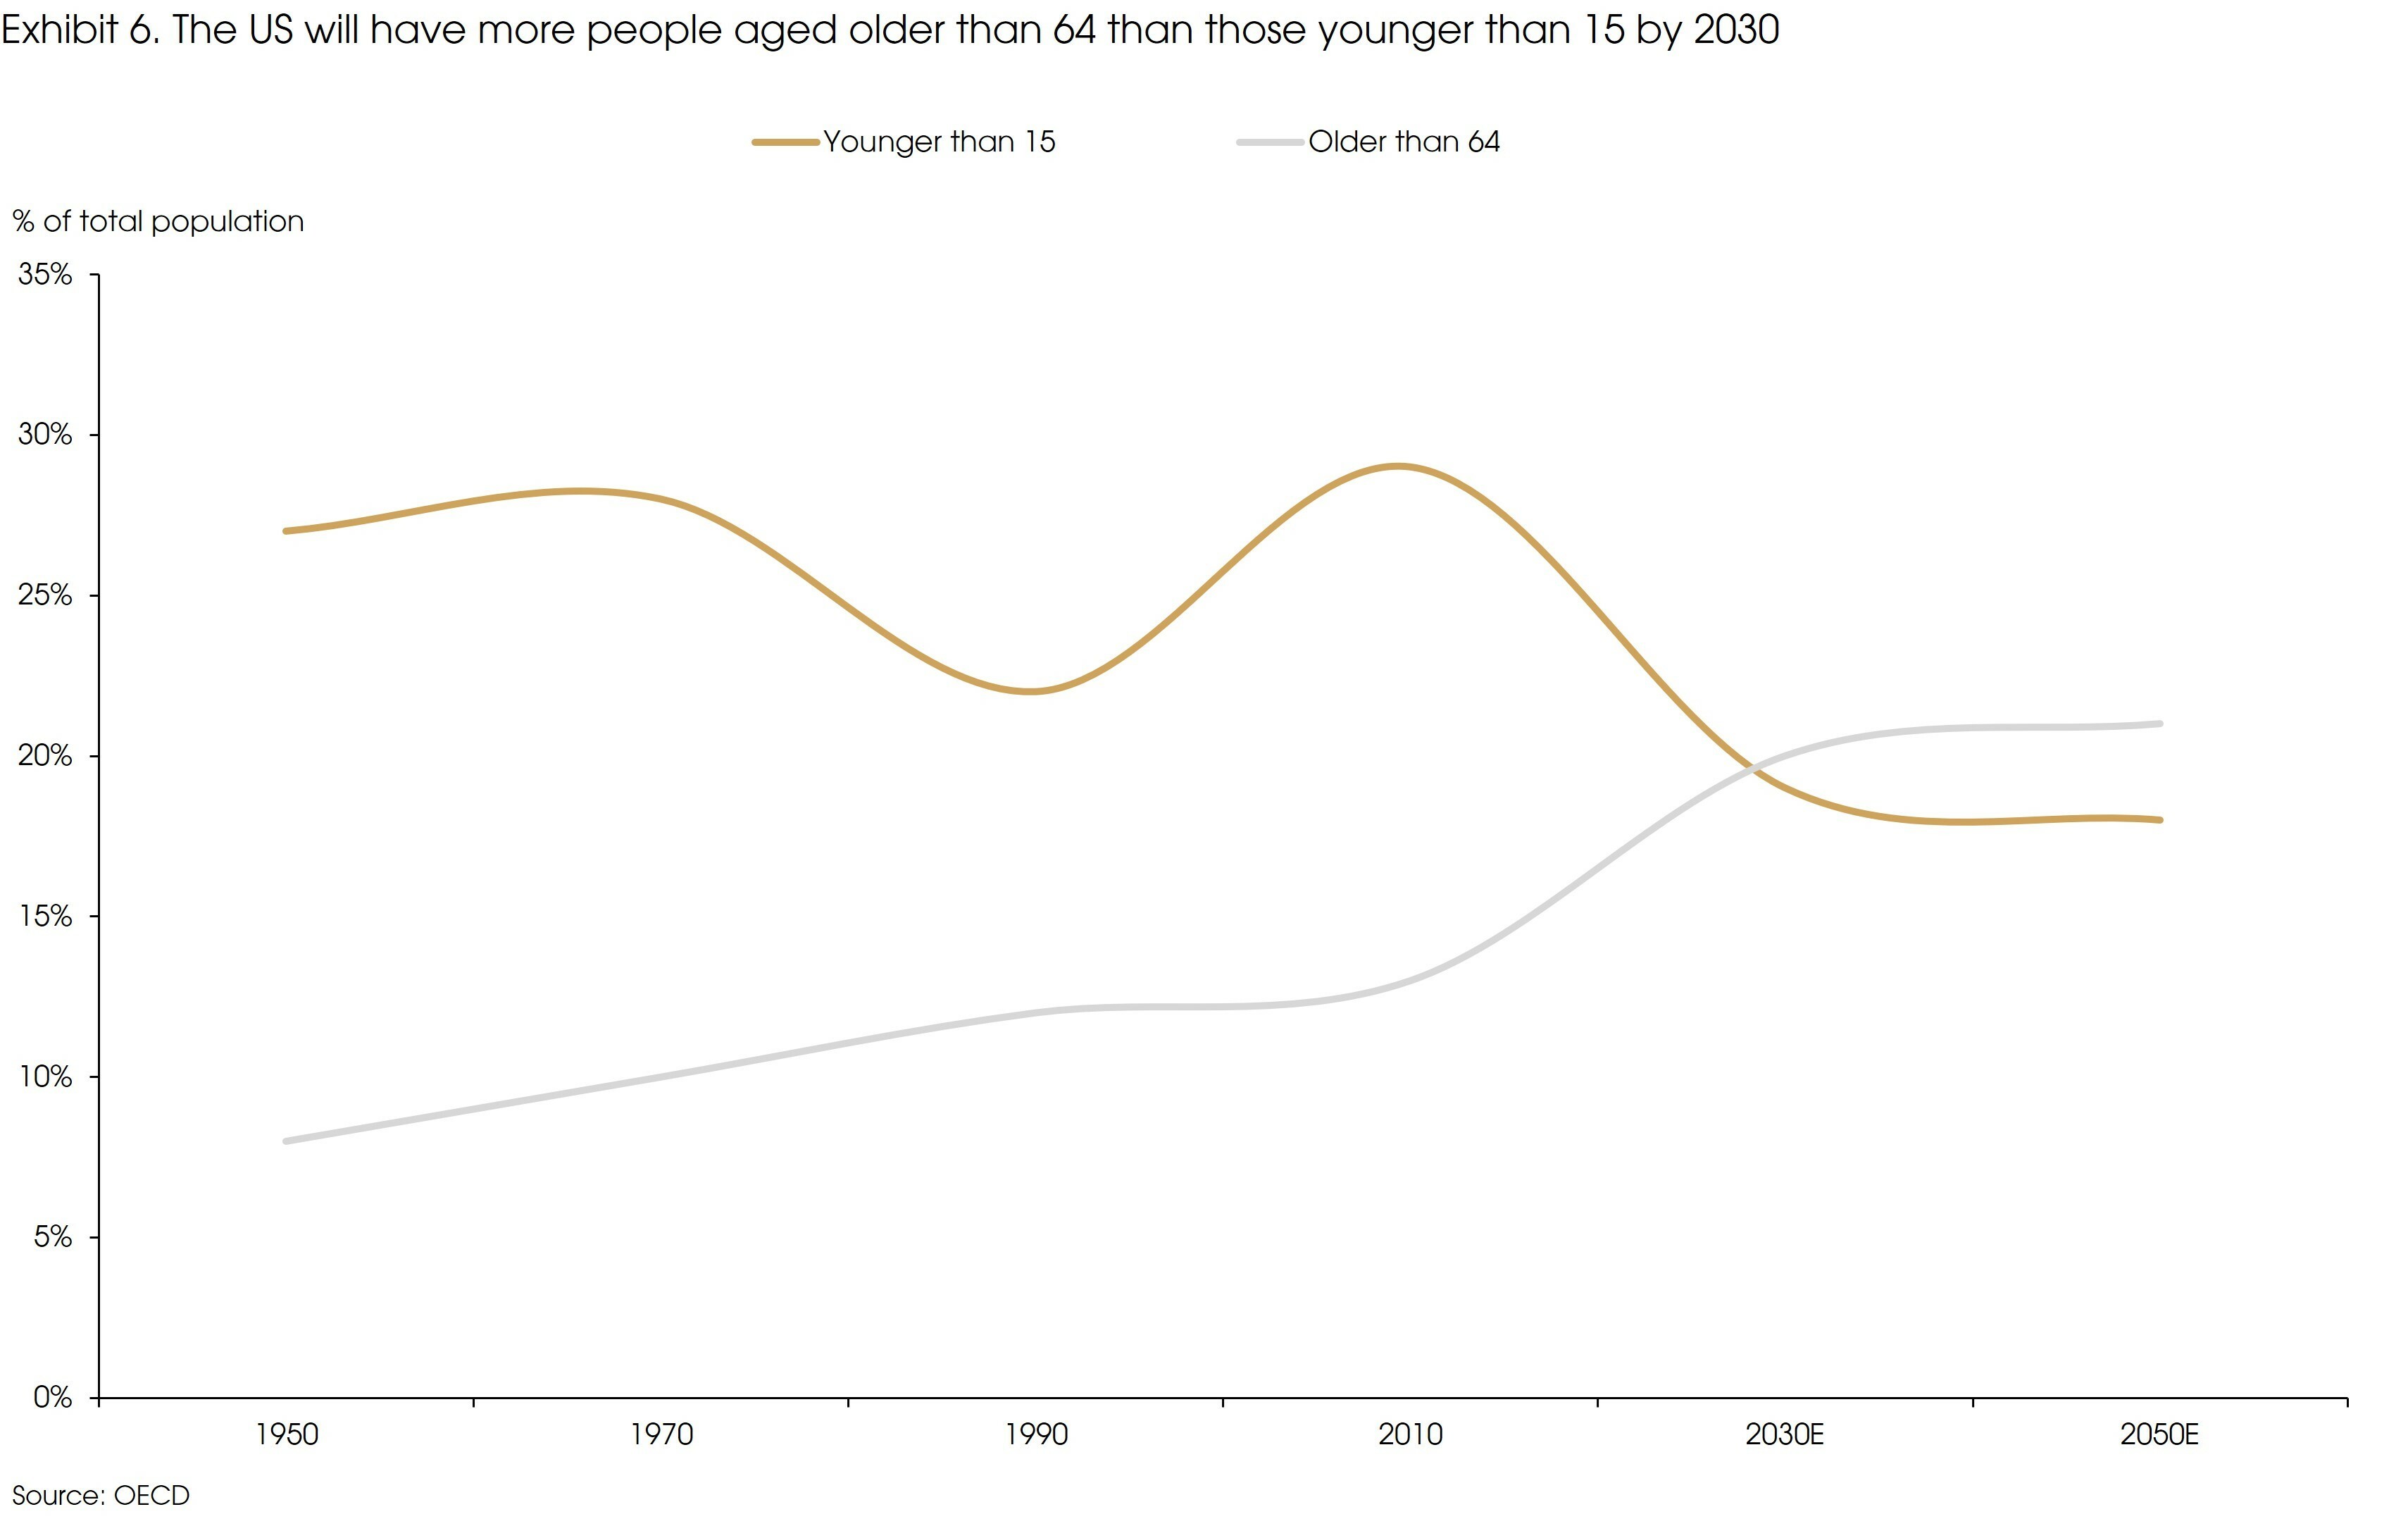 Exhibit 6 The US Will Have More People Aged Older Than 64 Than Those Younger Than 15 by 2030